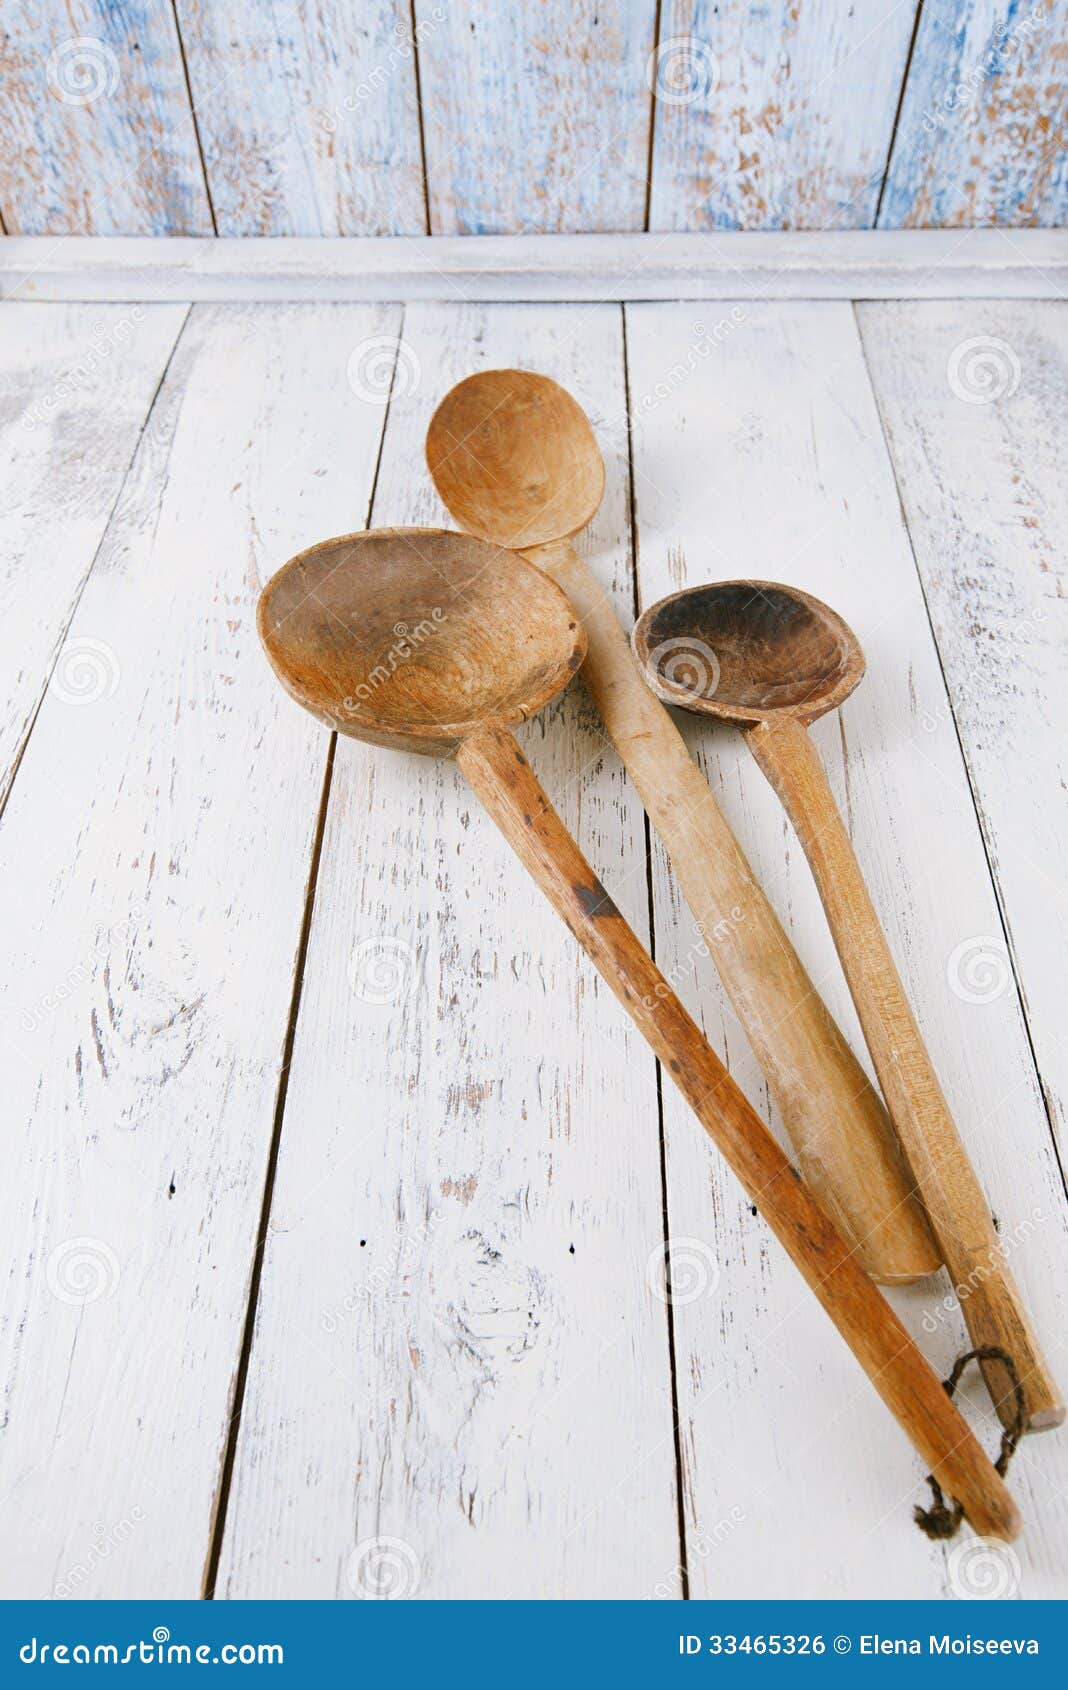 Retro Kitchen Utensils Wood Spoon On Old Wooden Table In 